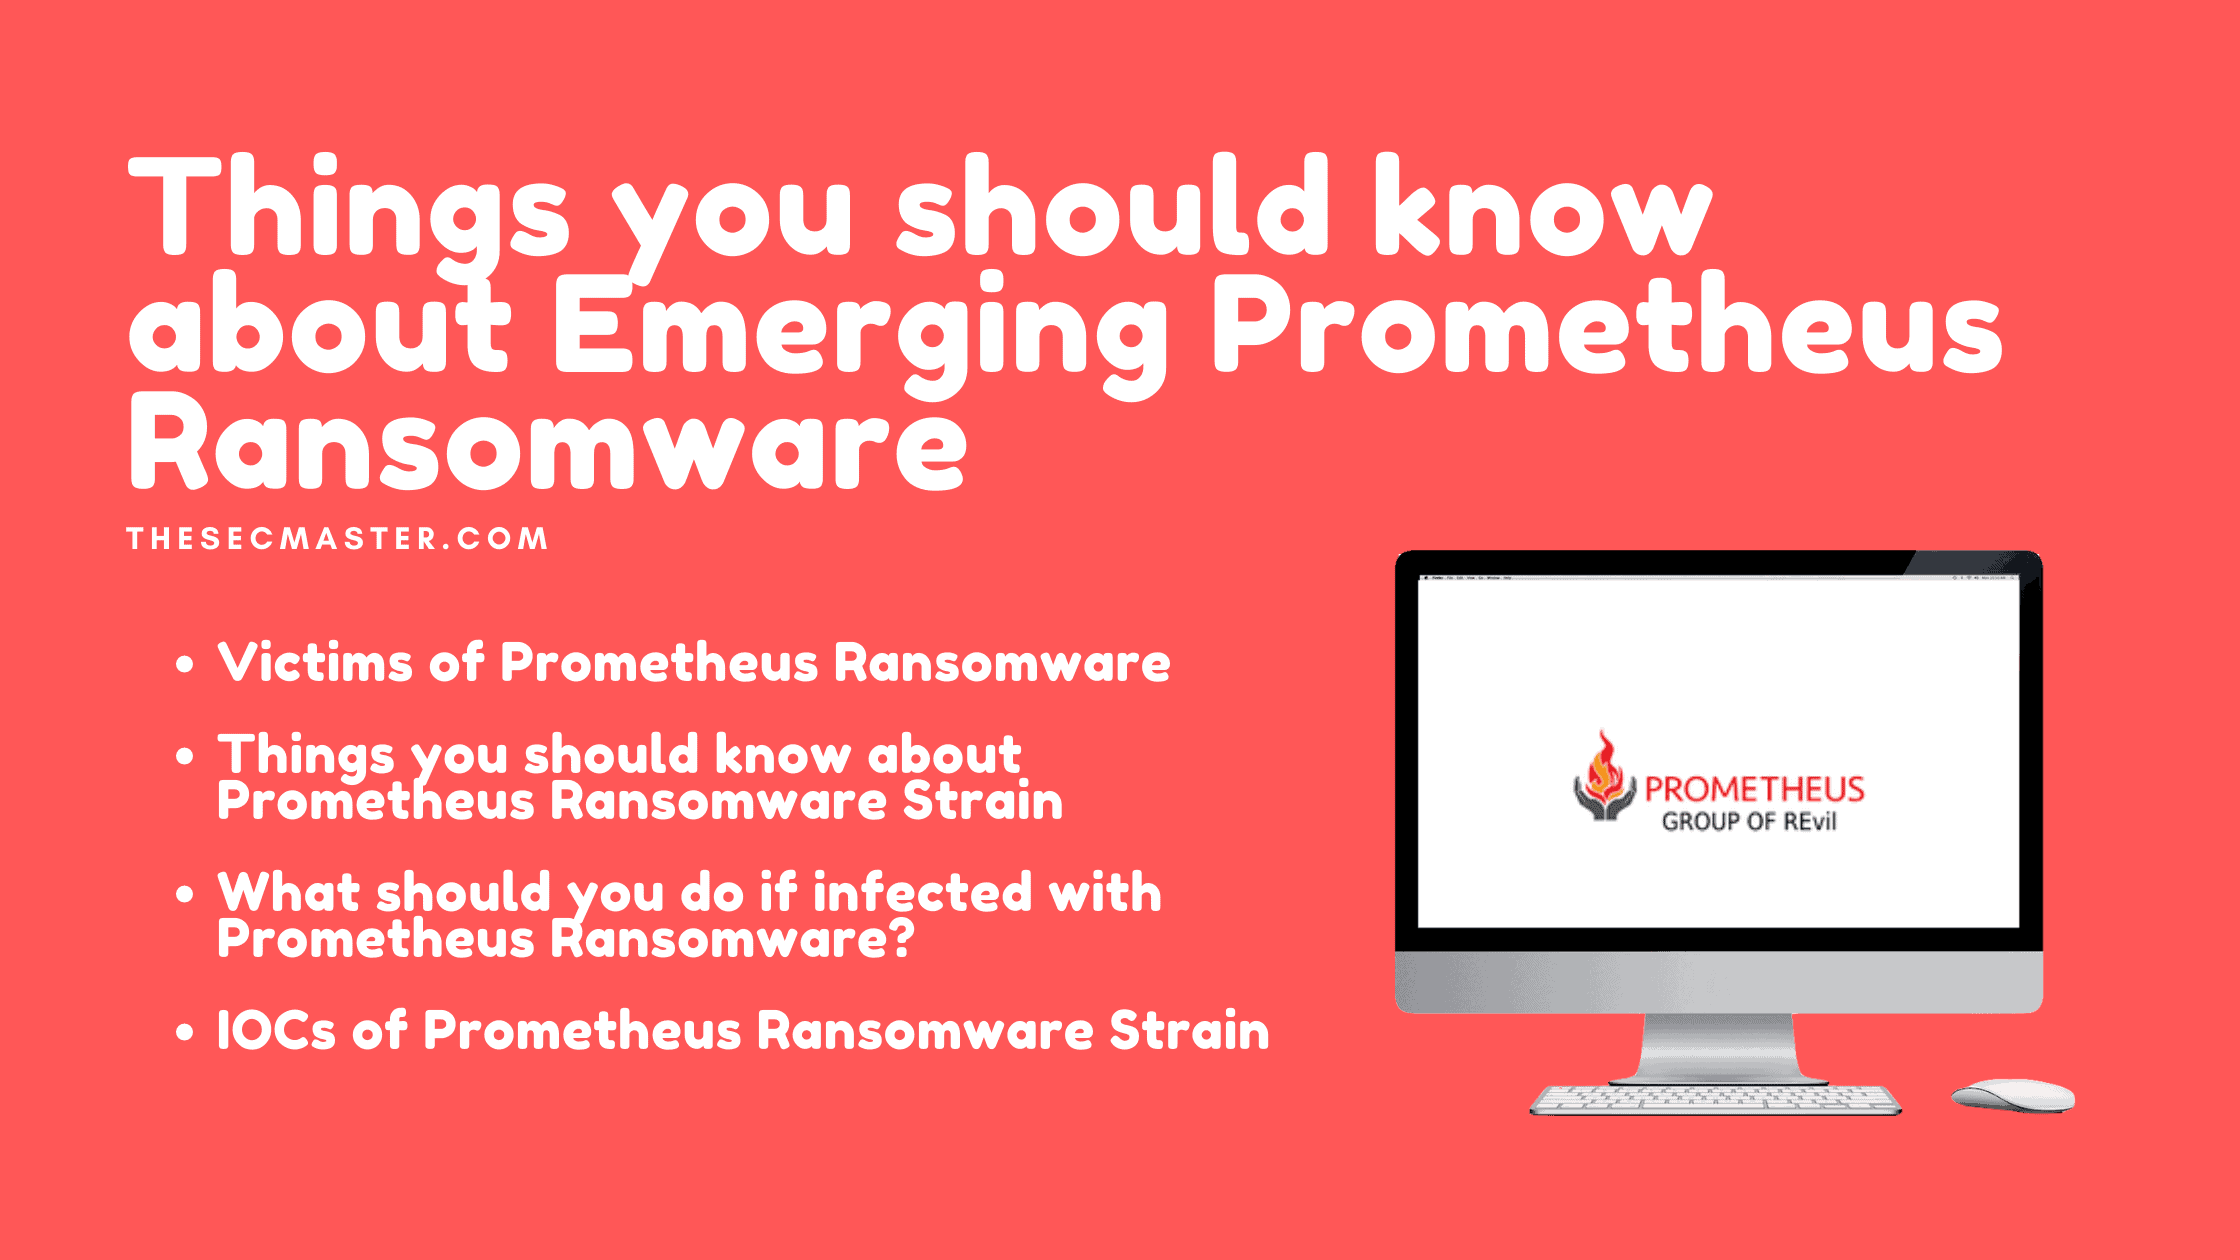 Things You Should Know About Emerging Prometheus Ransomware